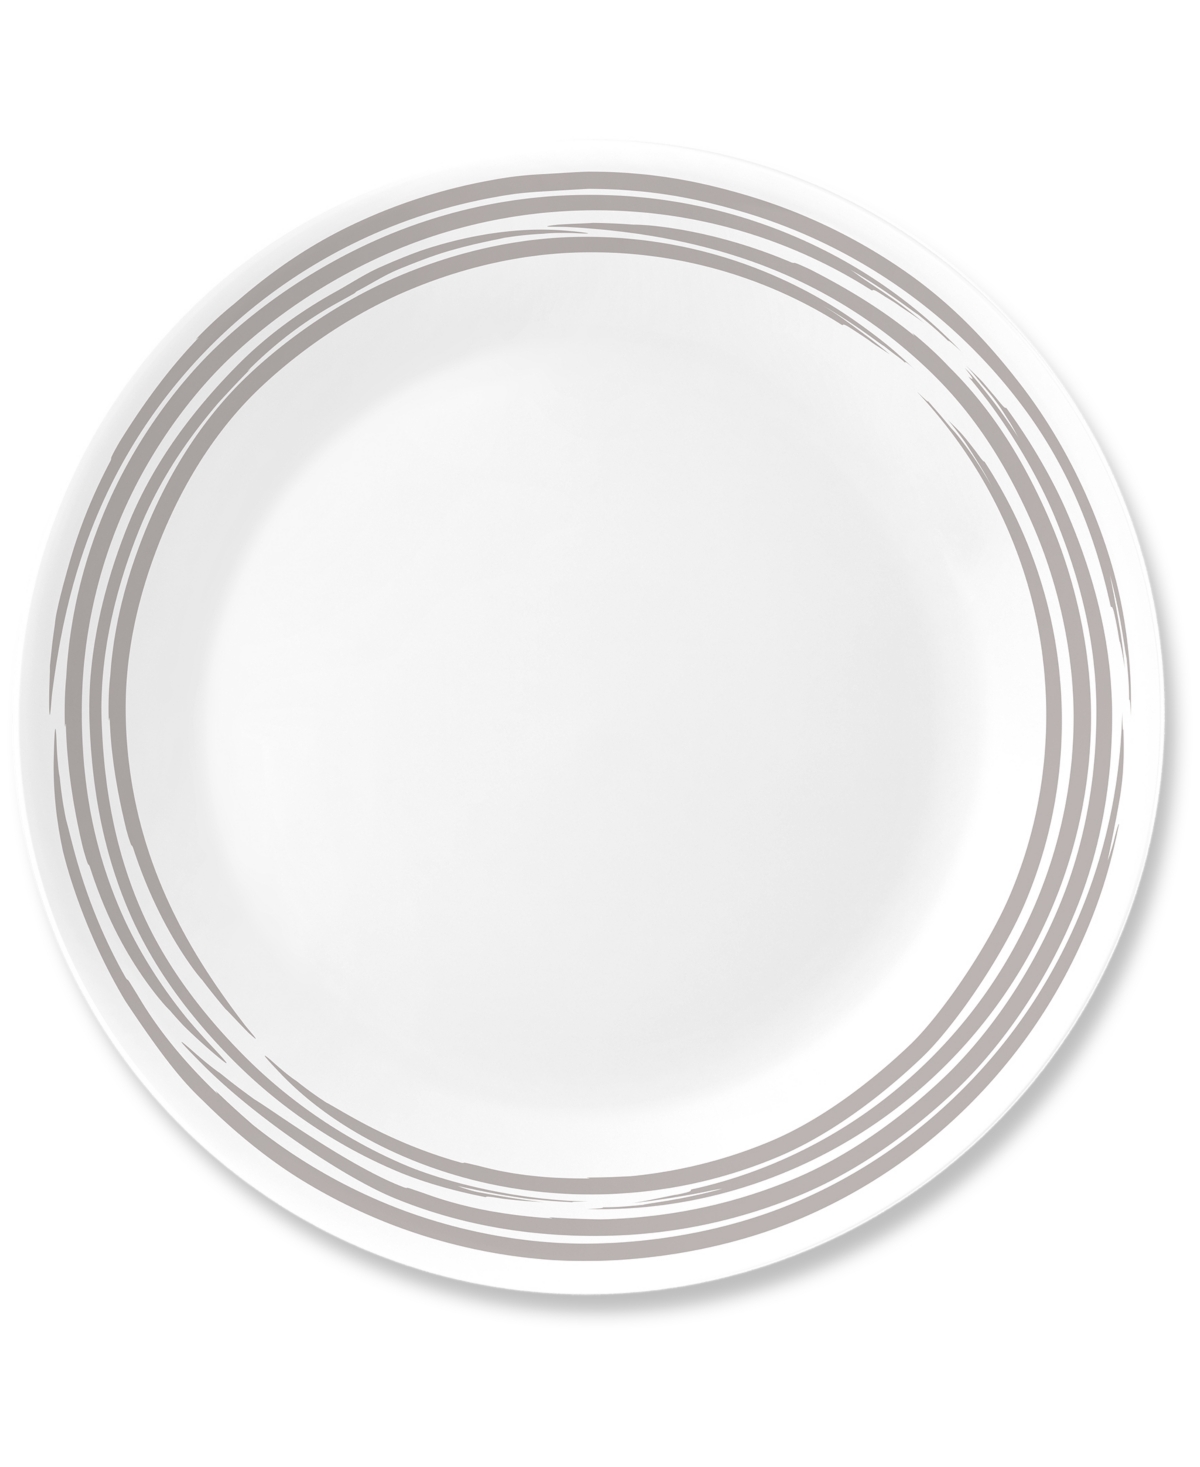 Brushed Silver-Tone Dinner Plate - White, Silvery-Gray